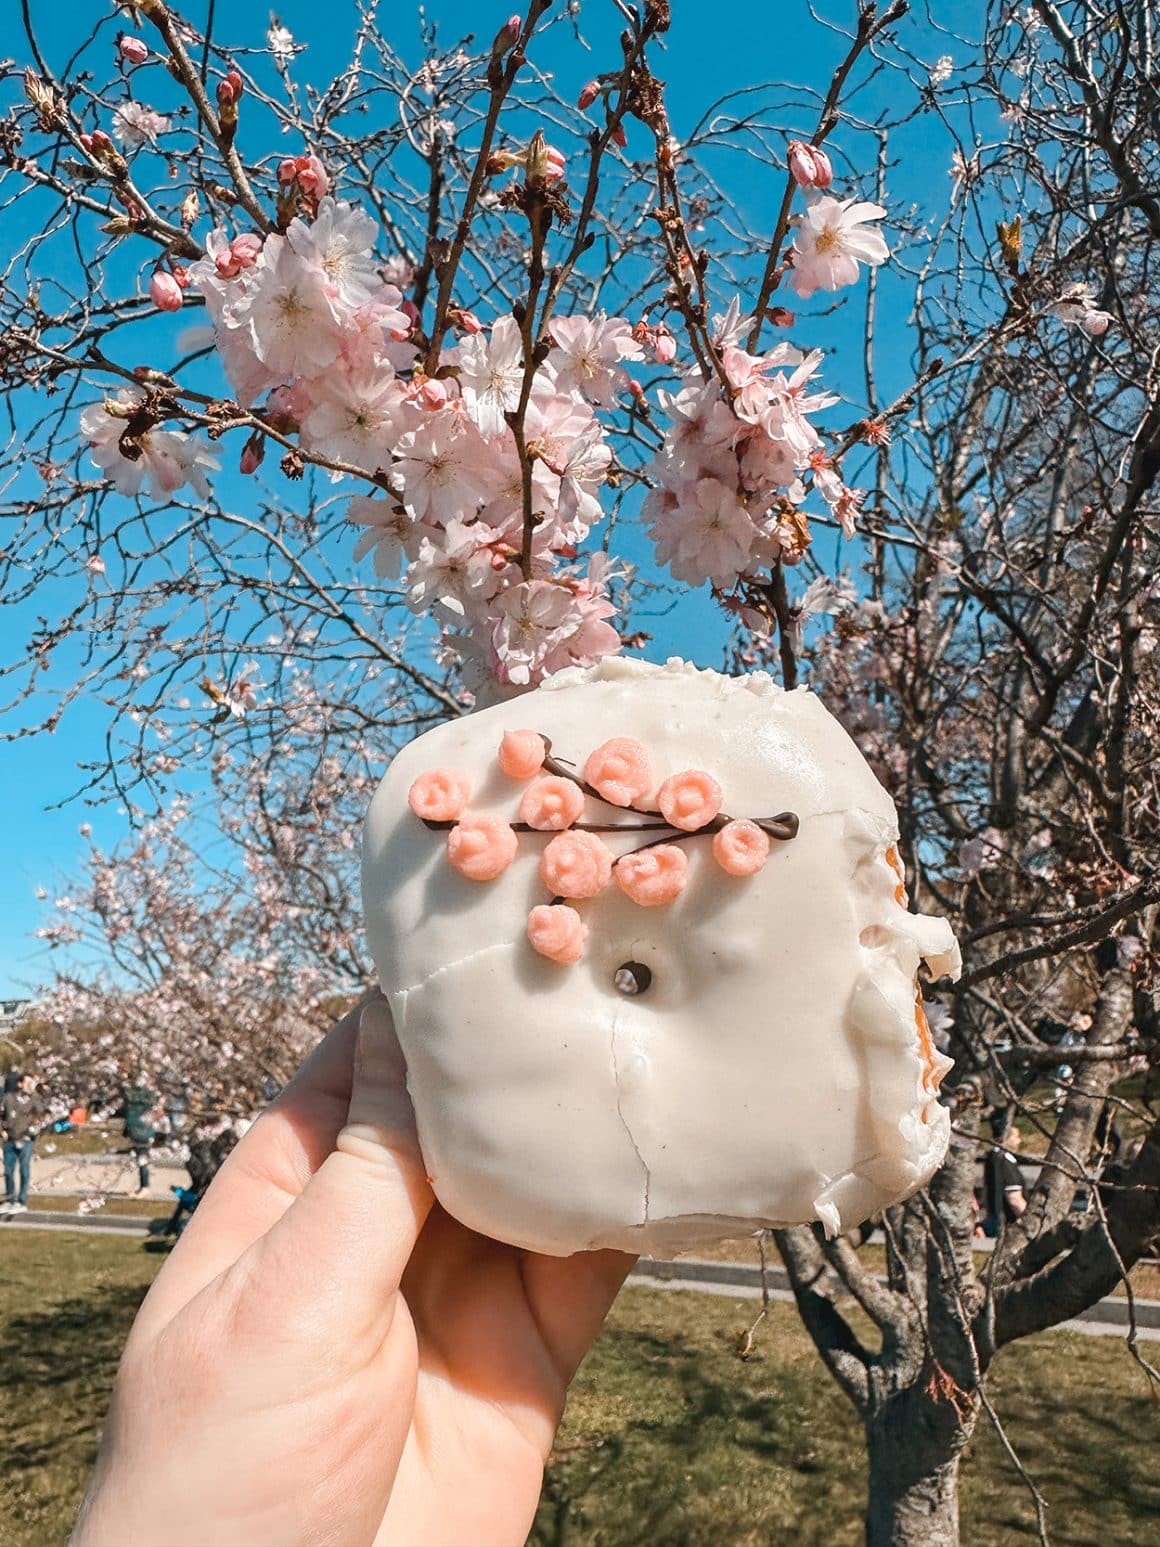 Cherry blossom donuts from Astro Chicken and Donuts in D.C. - photo credit Keryn Means Twist Travel Magazine